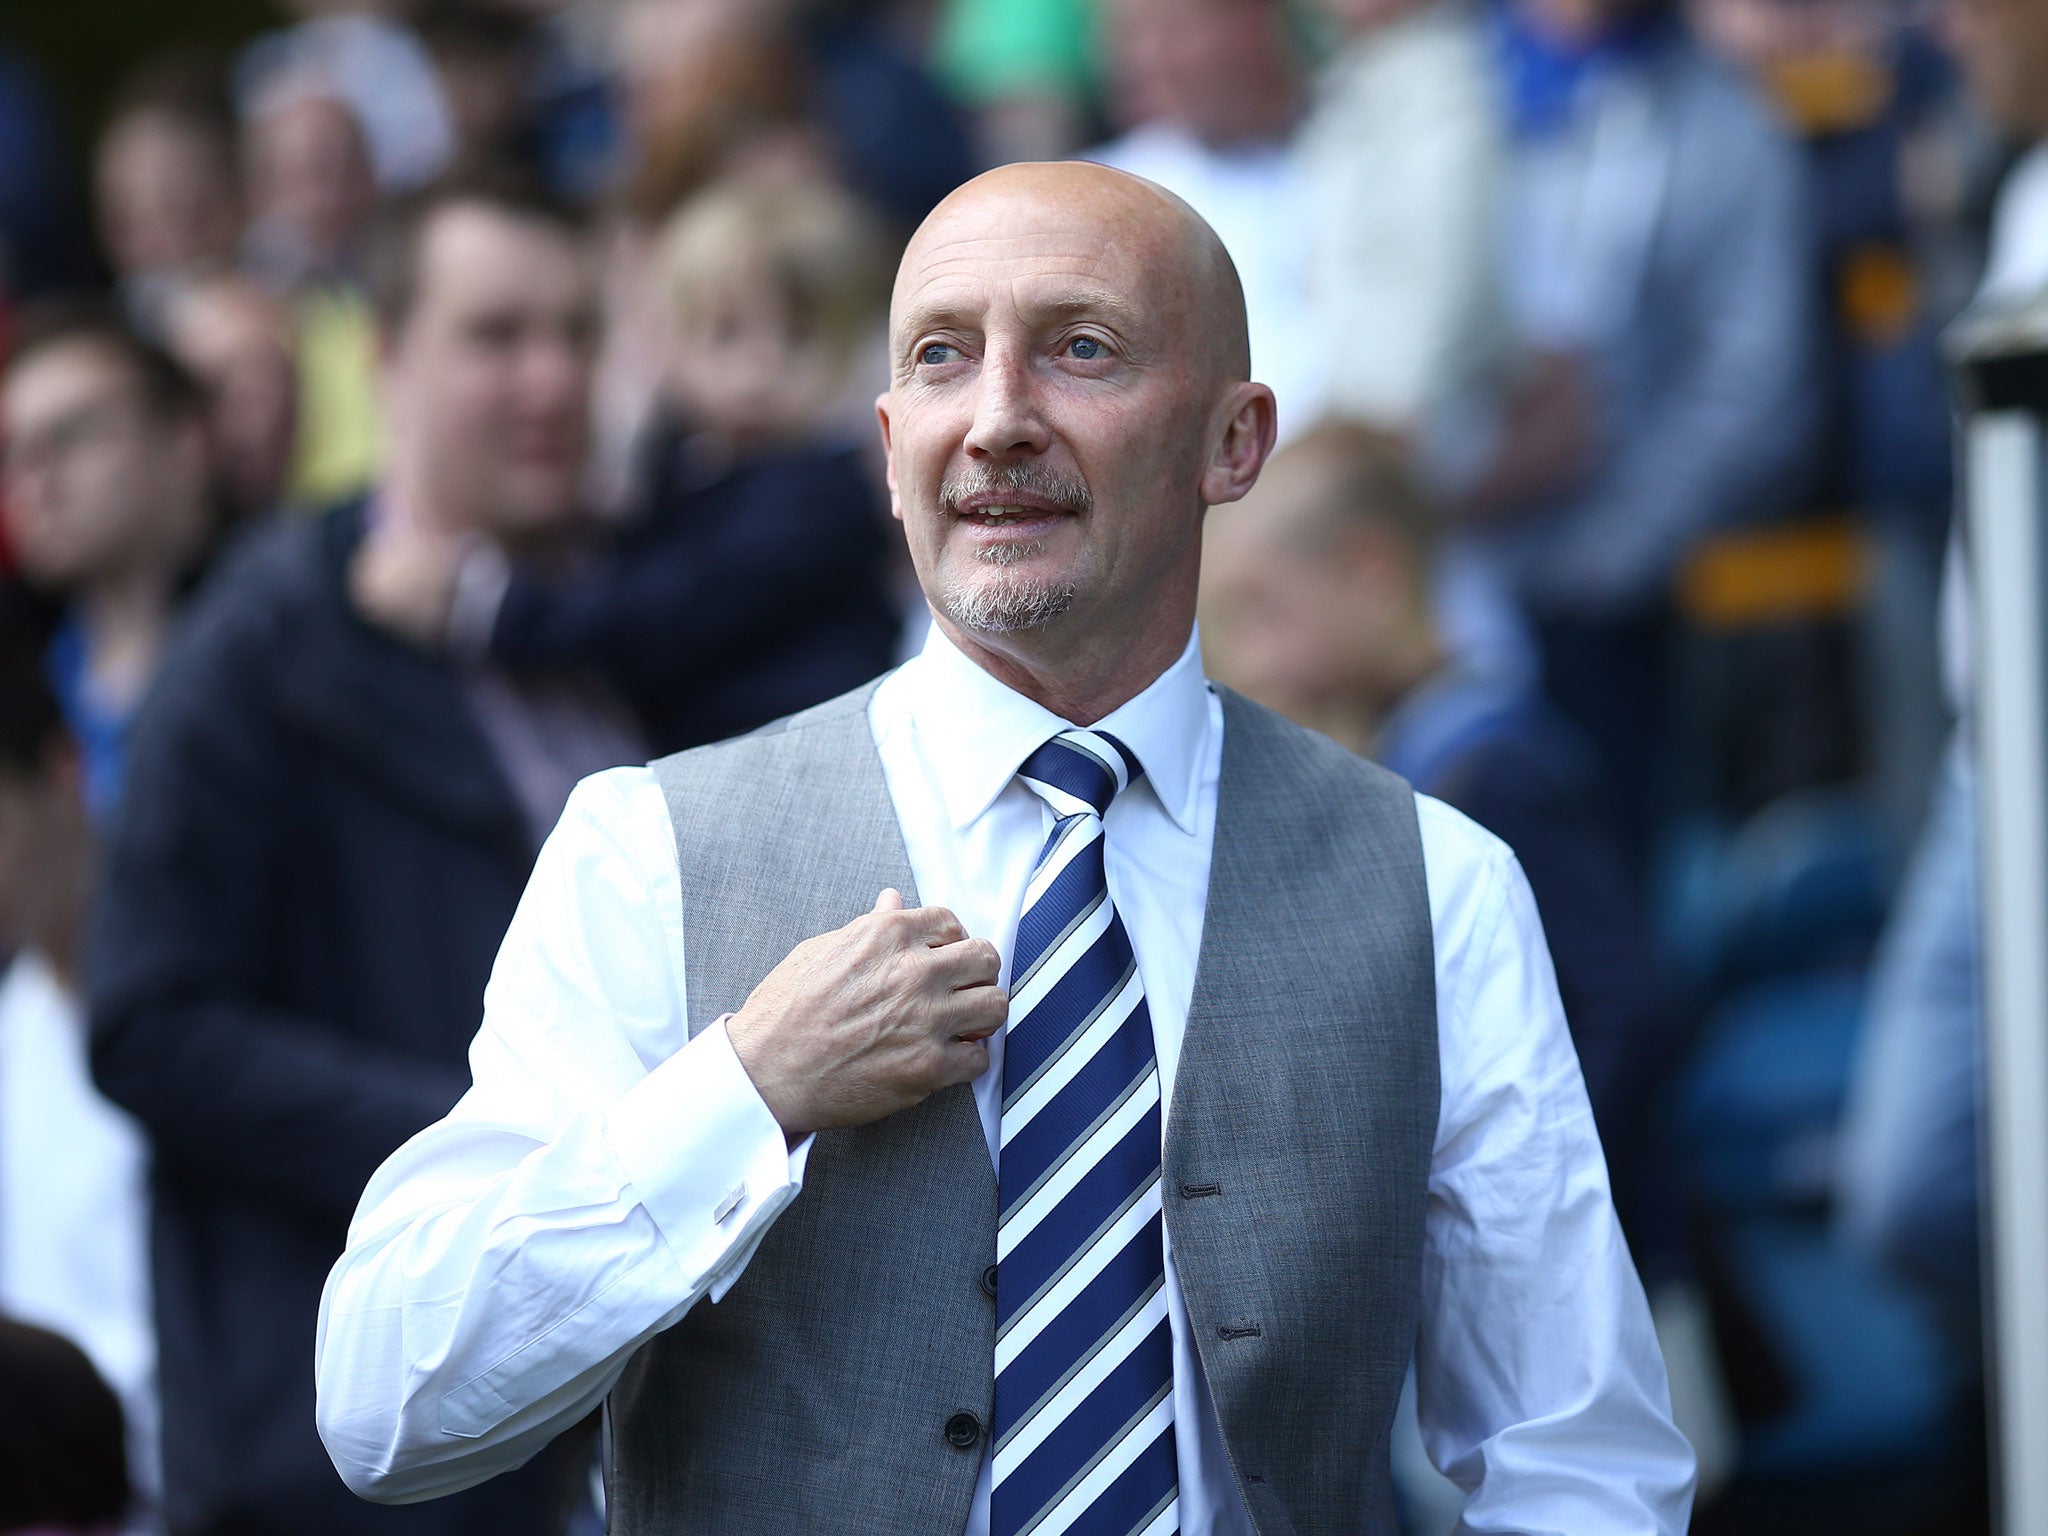 Millwall boss Ian Holloway celebrates after his team's victory